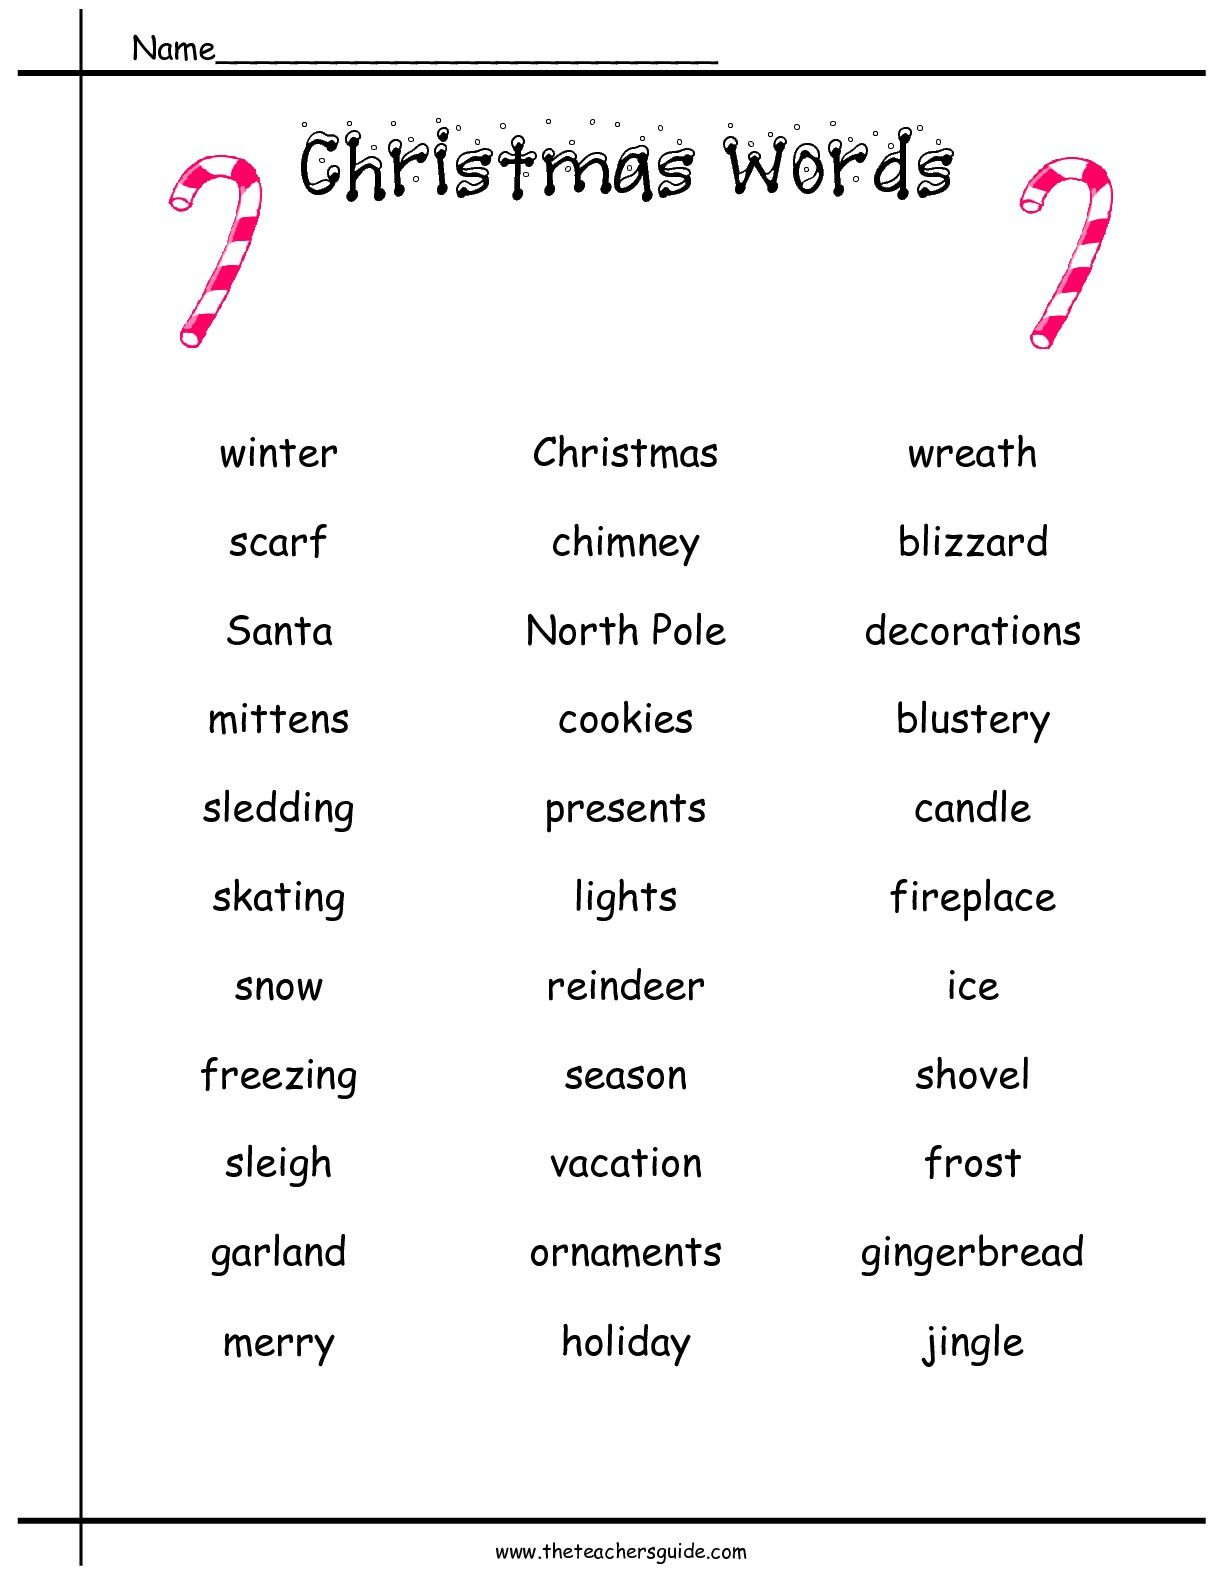 Christmas Printouts From The Teacher&amp;#039;s Guide | Christmas